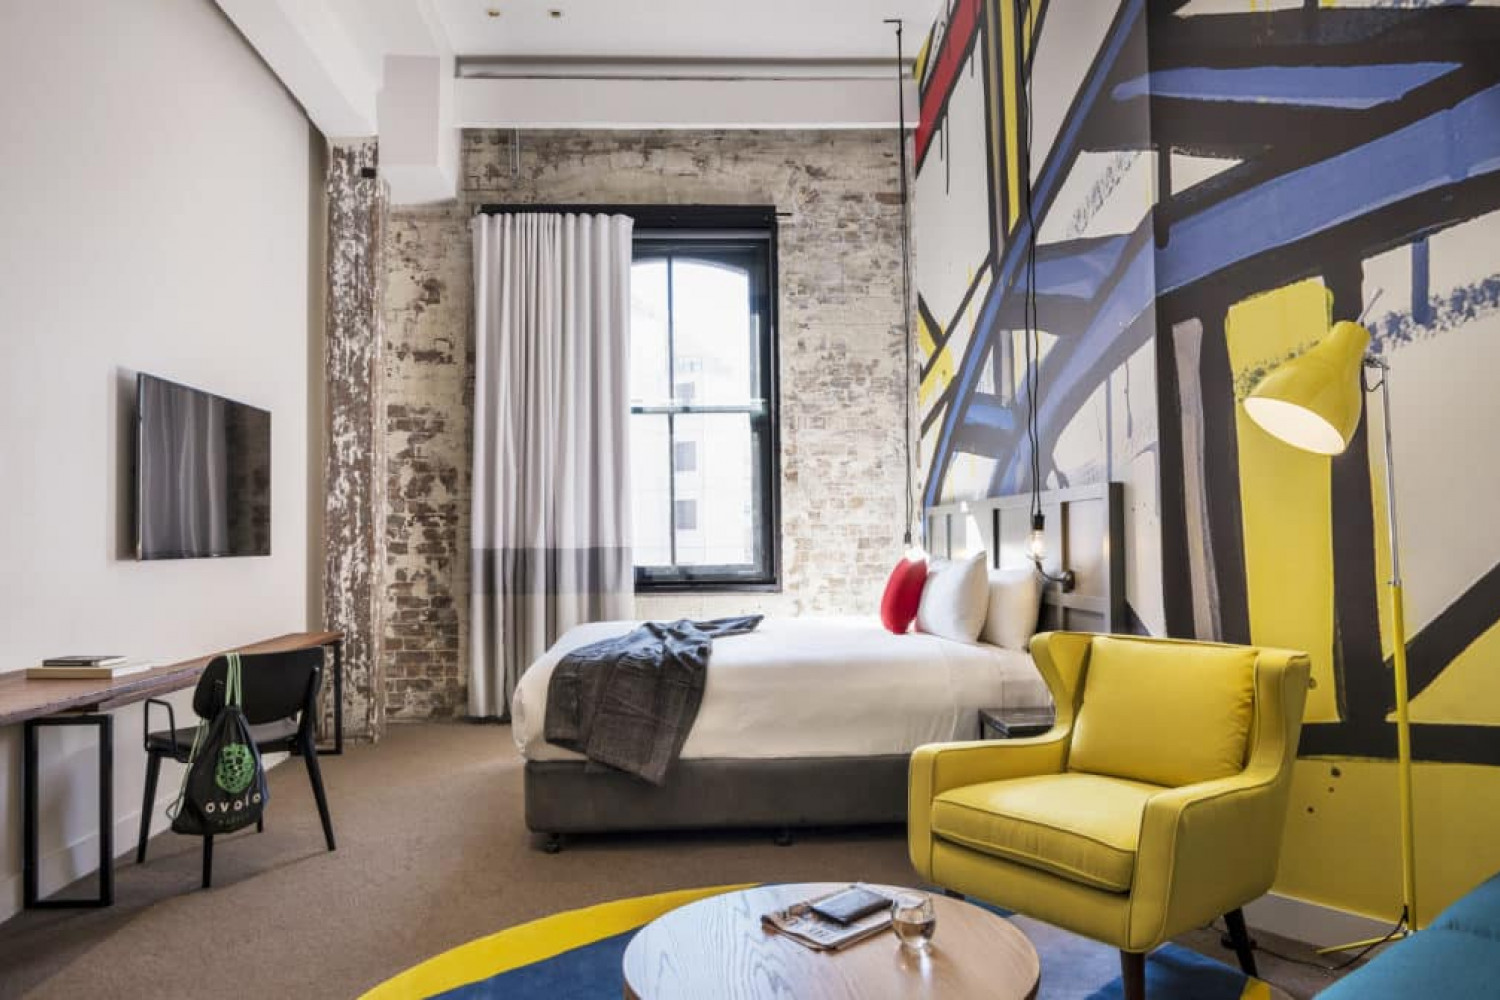 Ovolo 1888 Darling Harbour's rooms have vibrant red, yellow and blue murals by local artist Jasper Knight